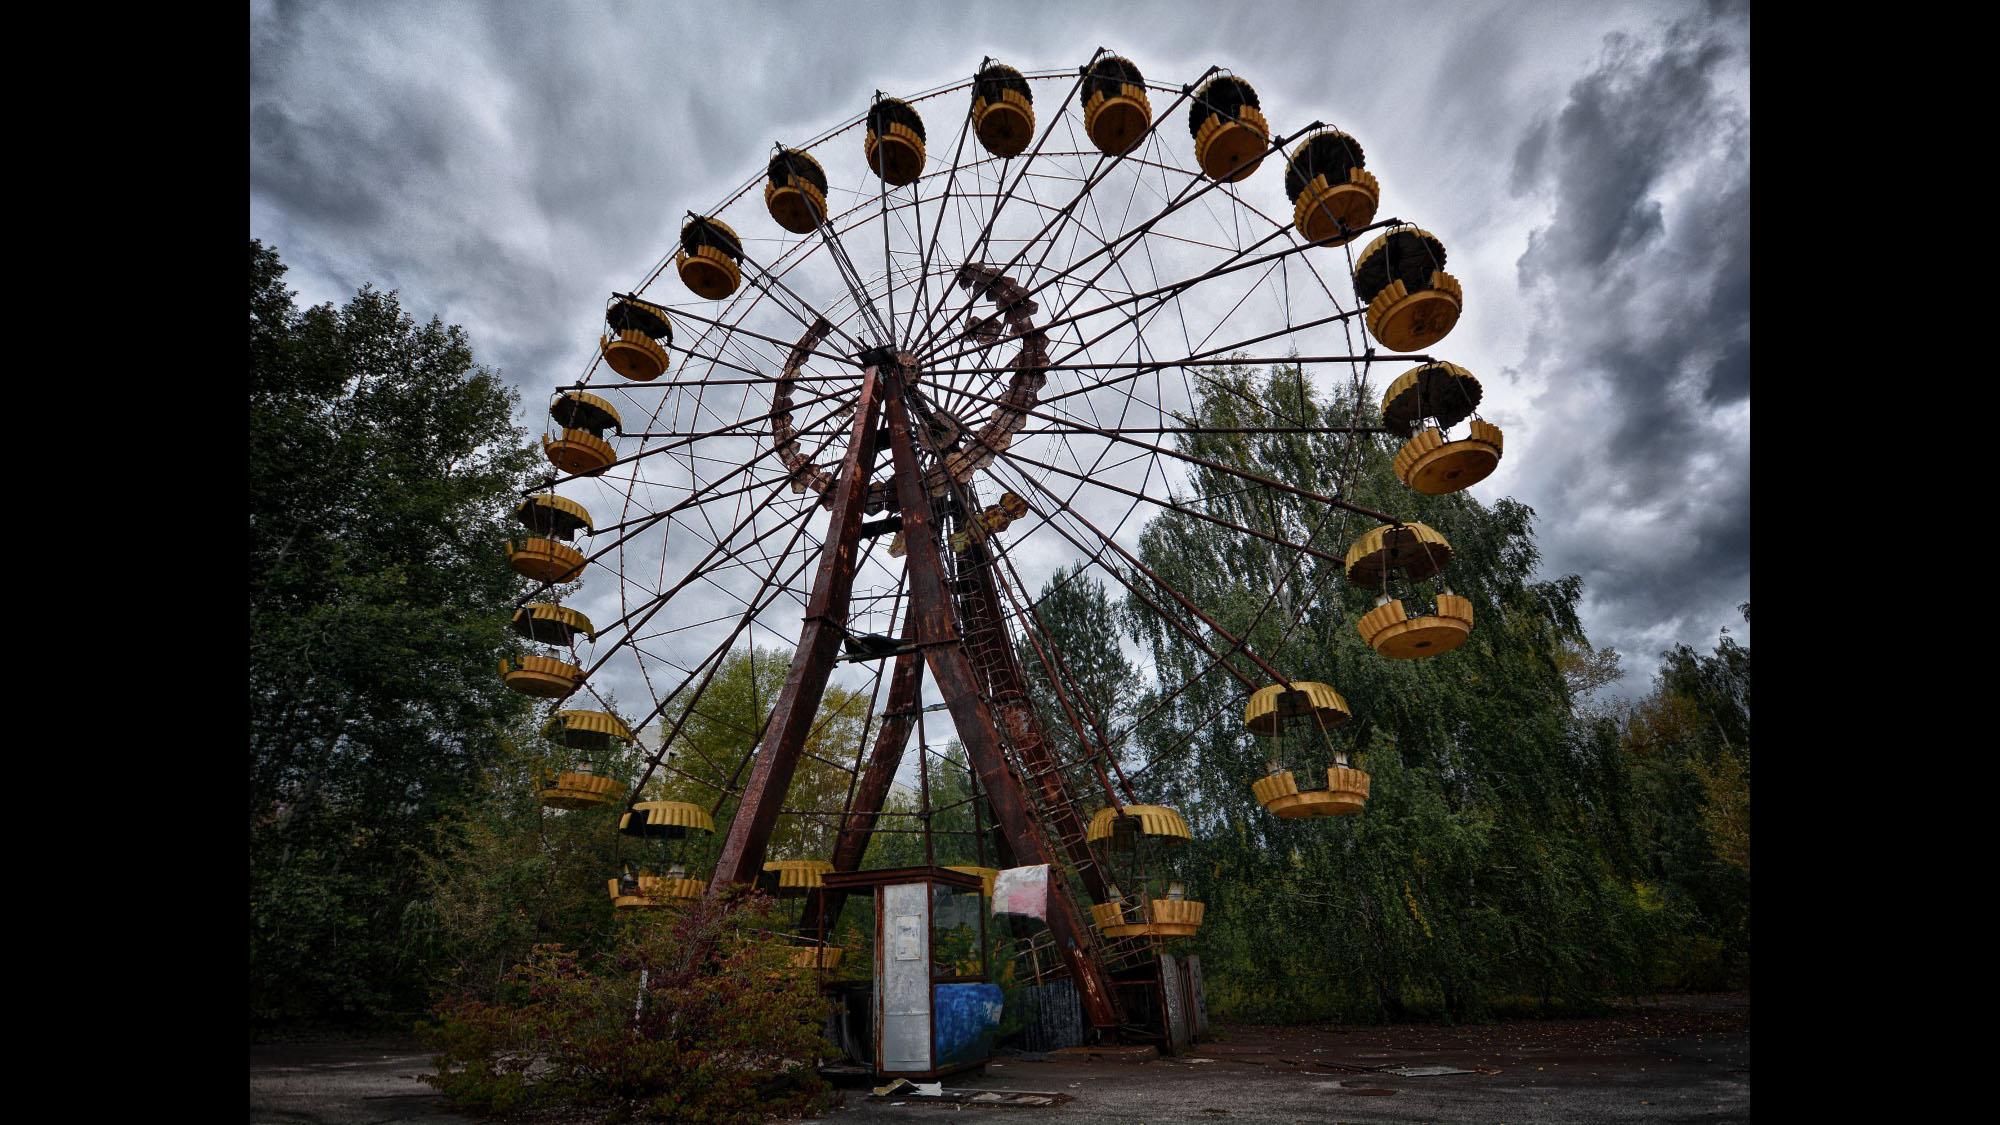 Olejniczak’s photography trips might take him from Saskatchewan to Chernobyl and the ghost town of Pripyat outside the notorious nuclear plant near the border of Russia and Ukraine. (Credit: Jerry Olejniczak)